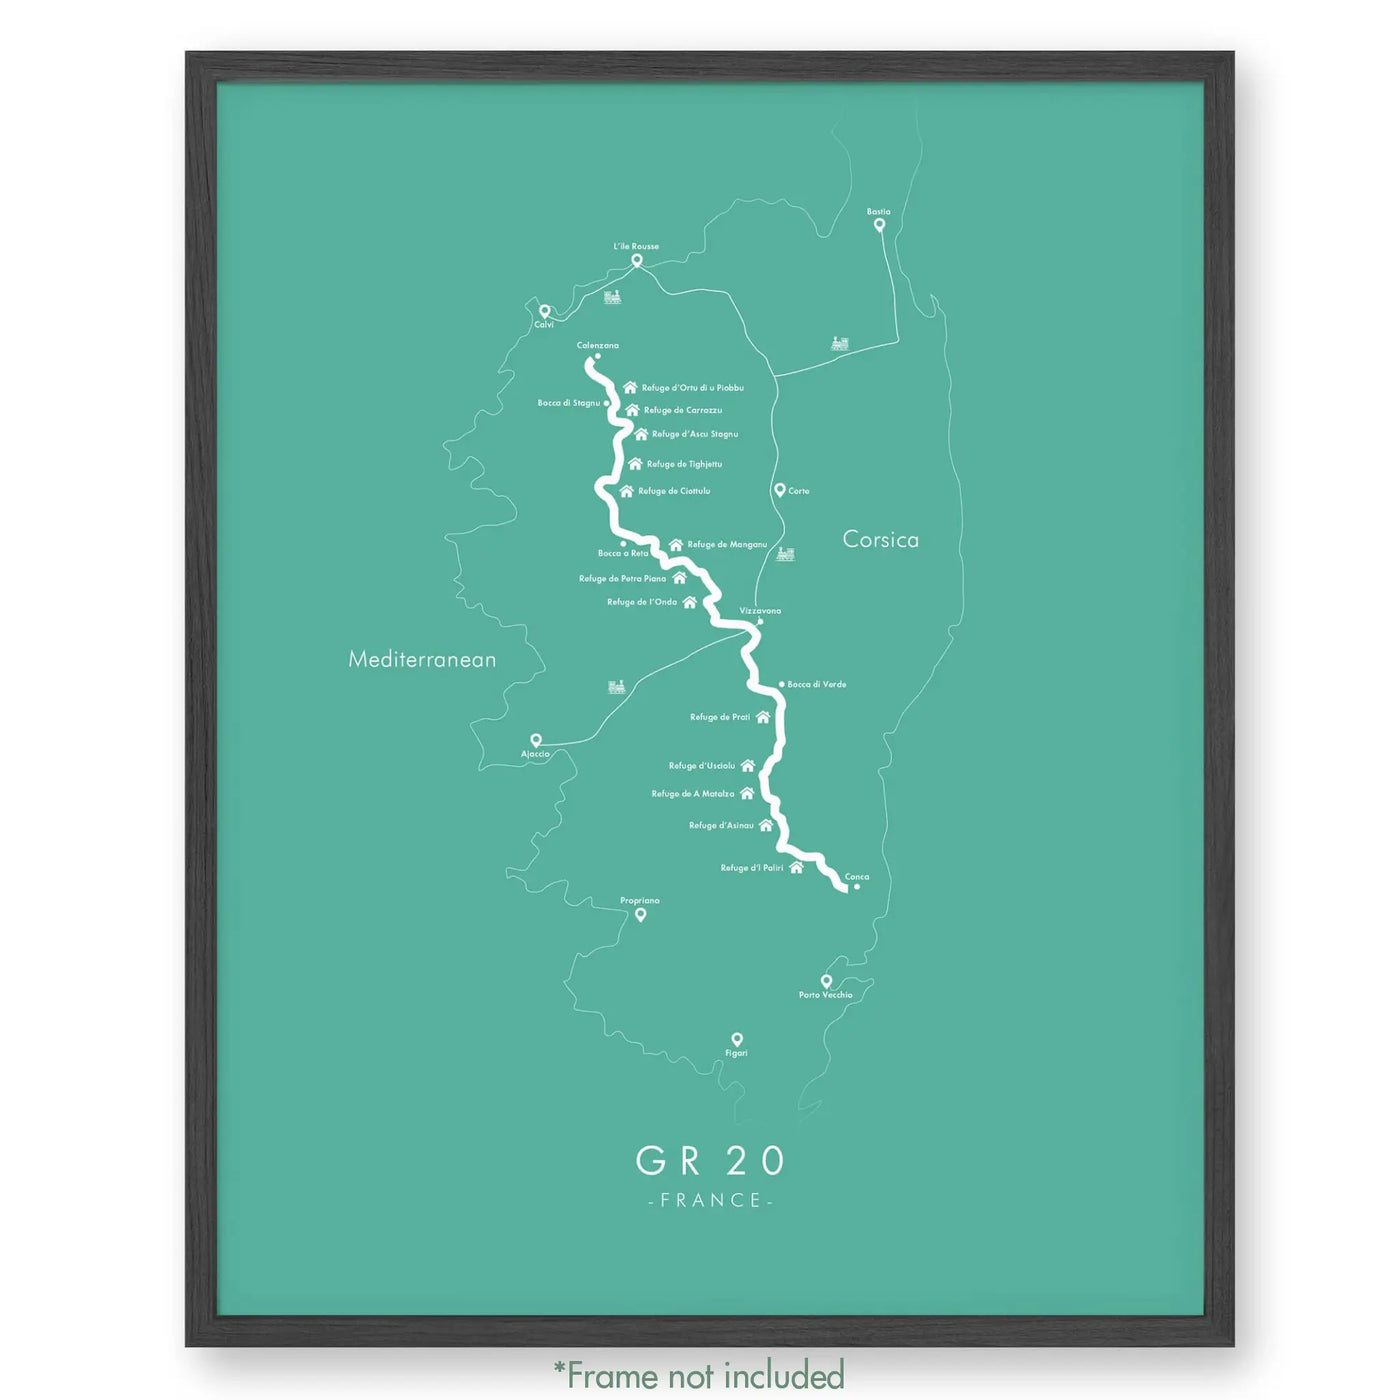 Trail Poster of GR20 - Teal